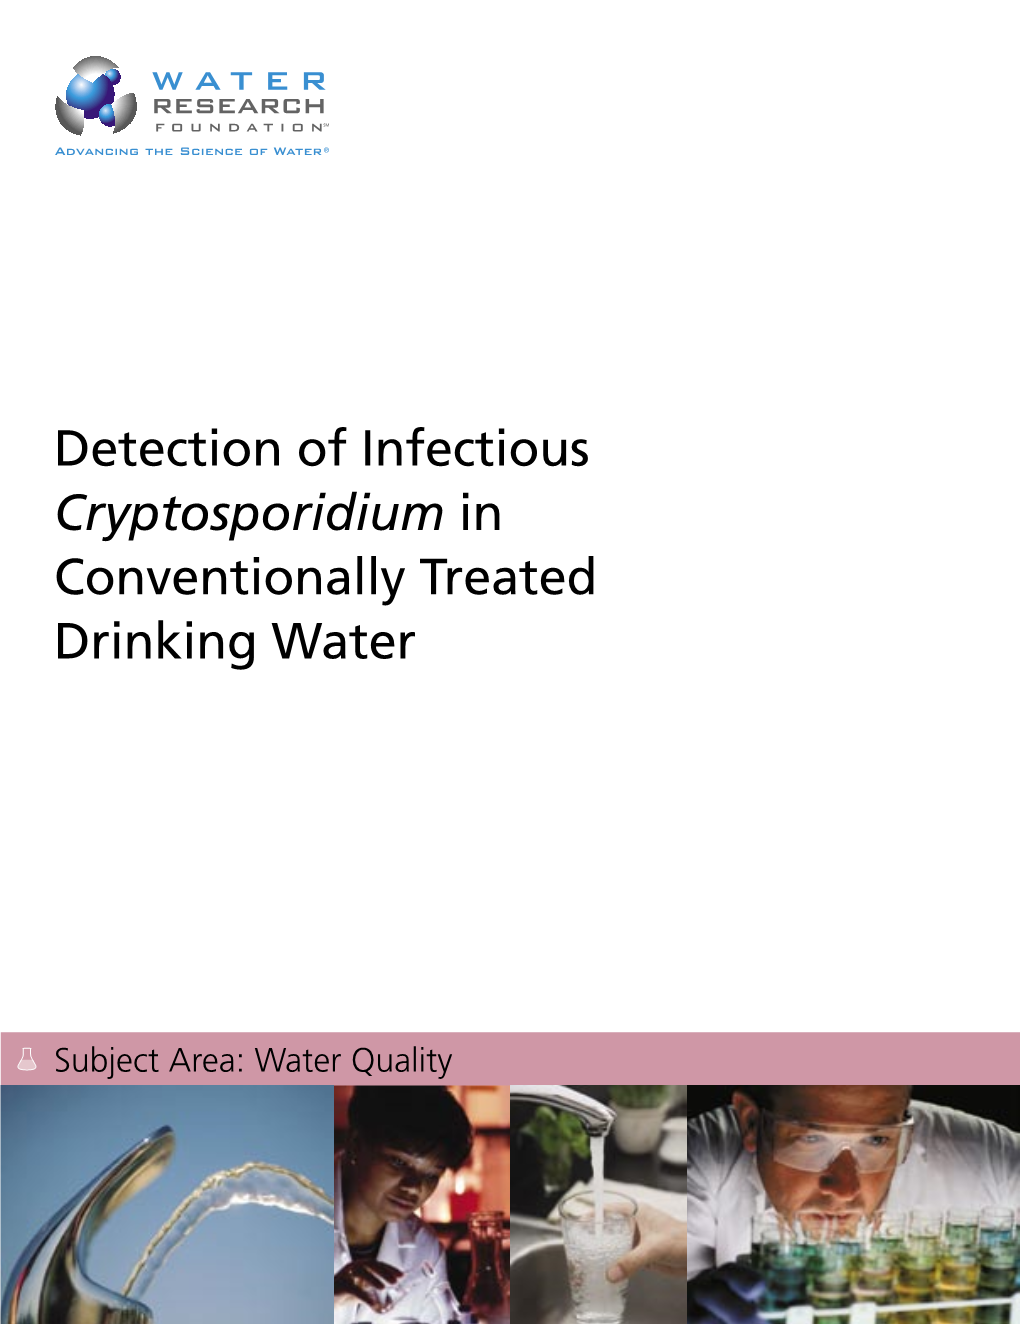 Detection of Infectious Cryptosporidium in Conventionally Treated Drinking Water